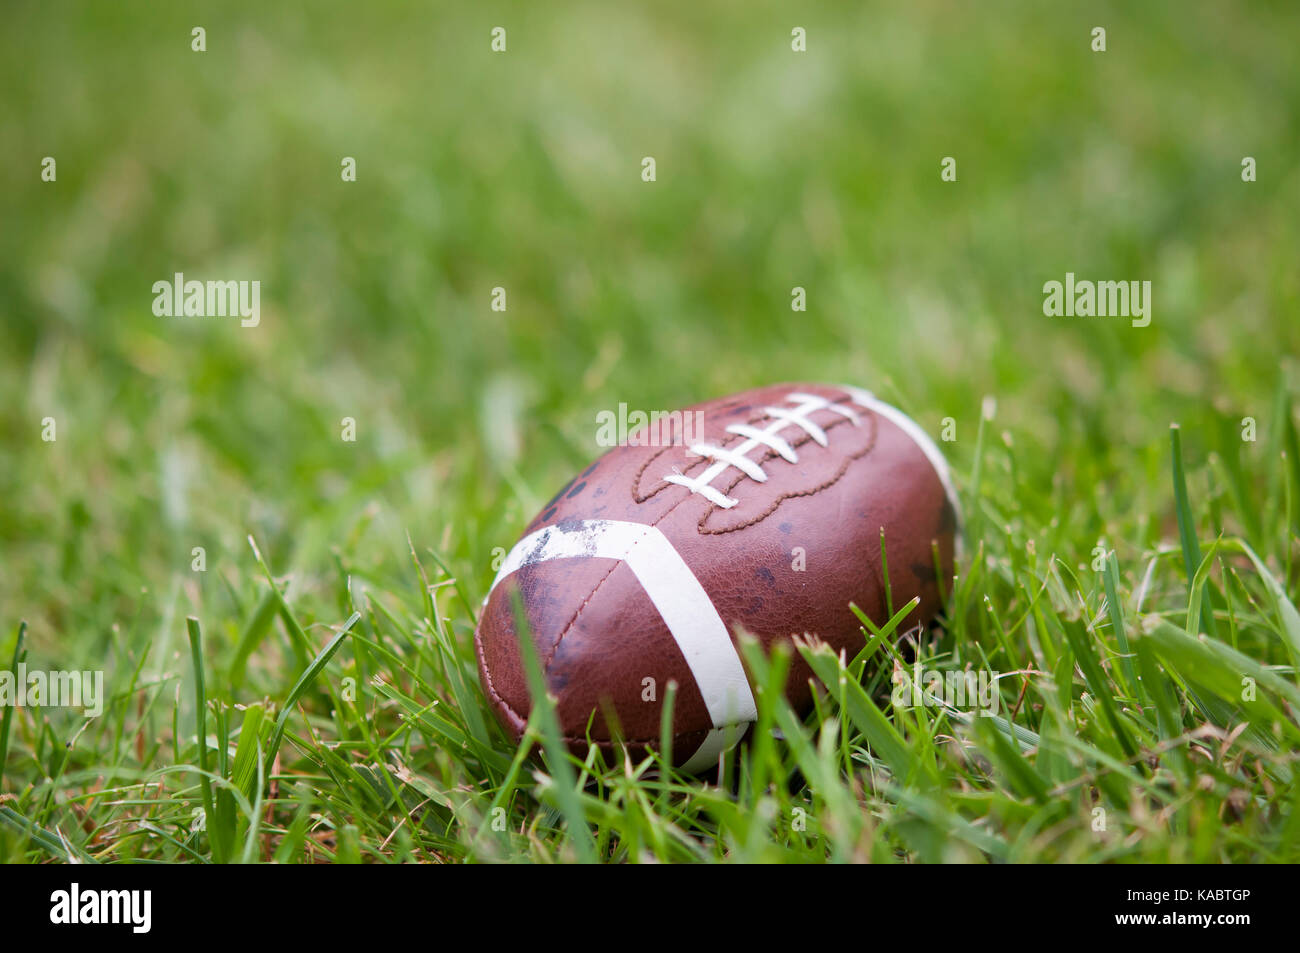 american football isolated laying in the summer grass Stock Photo